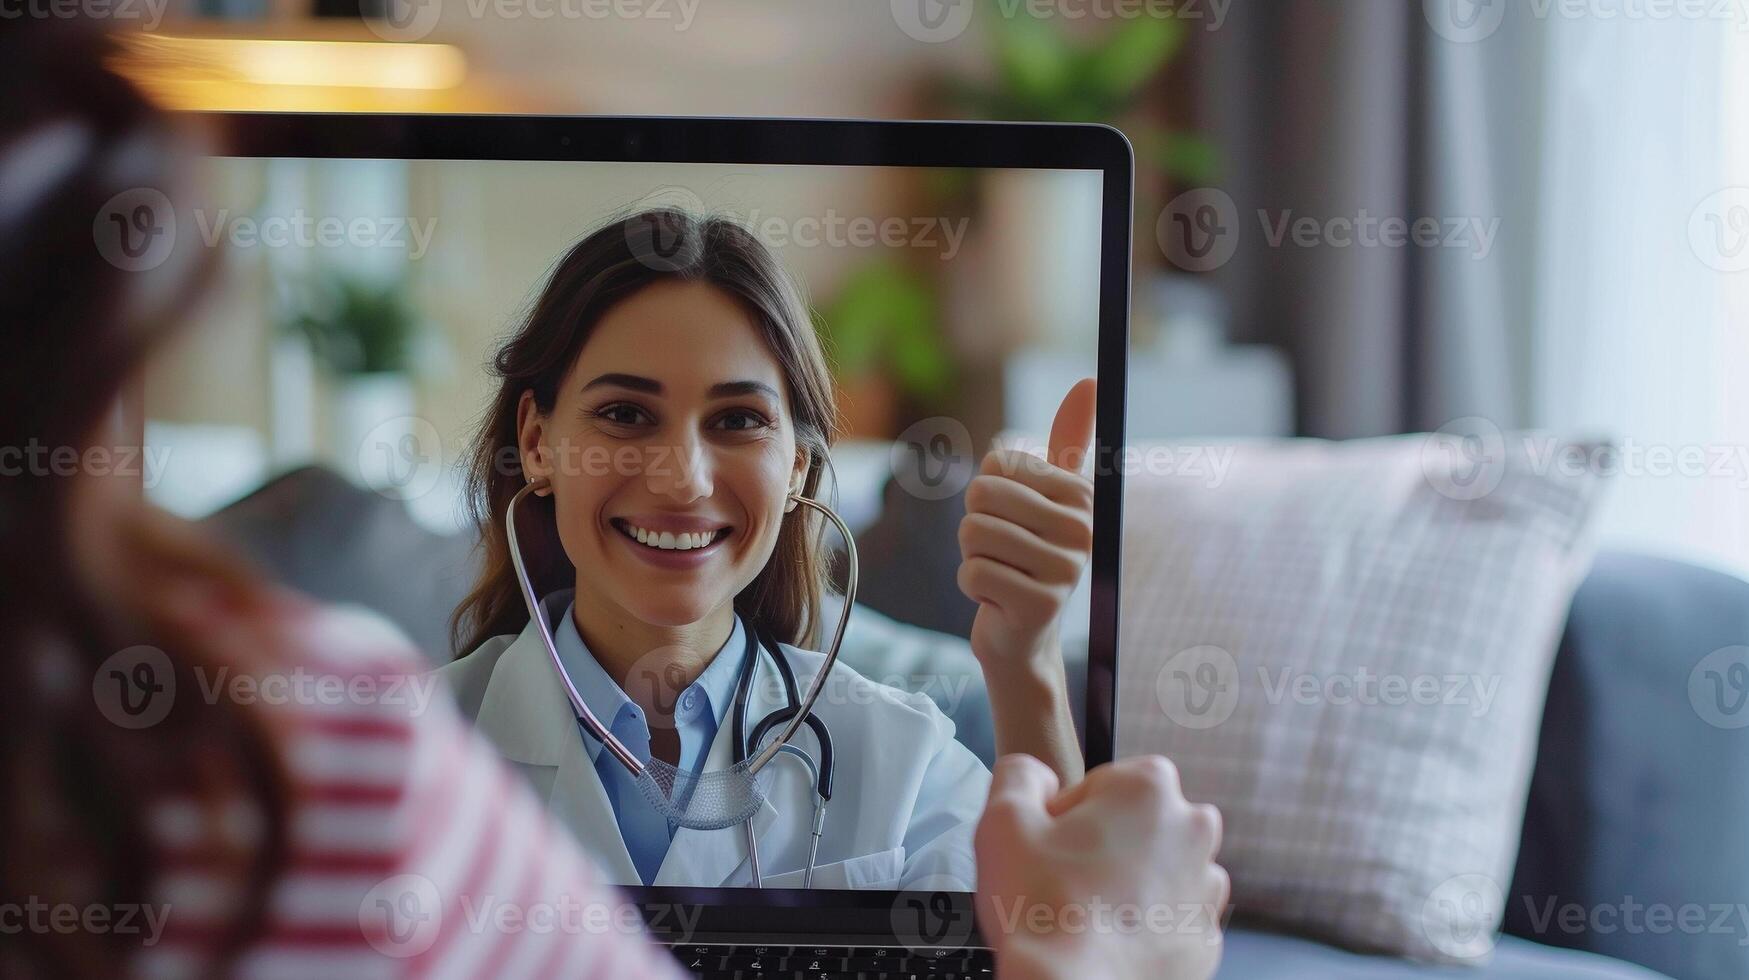 AI generated A heartwarming close-up of a patient's relieved and joyful expression on a doctor's laptop screen during a video call. The doctor's hands are seen giving a thumbs-up to the patient photo